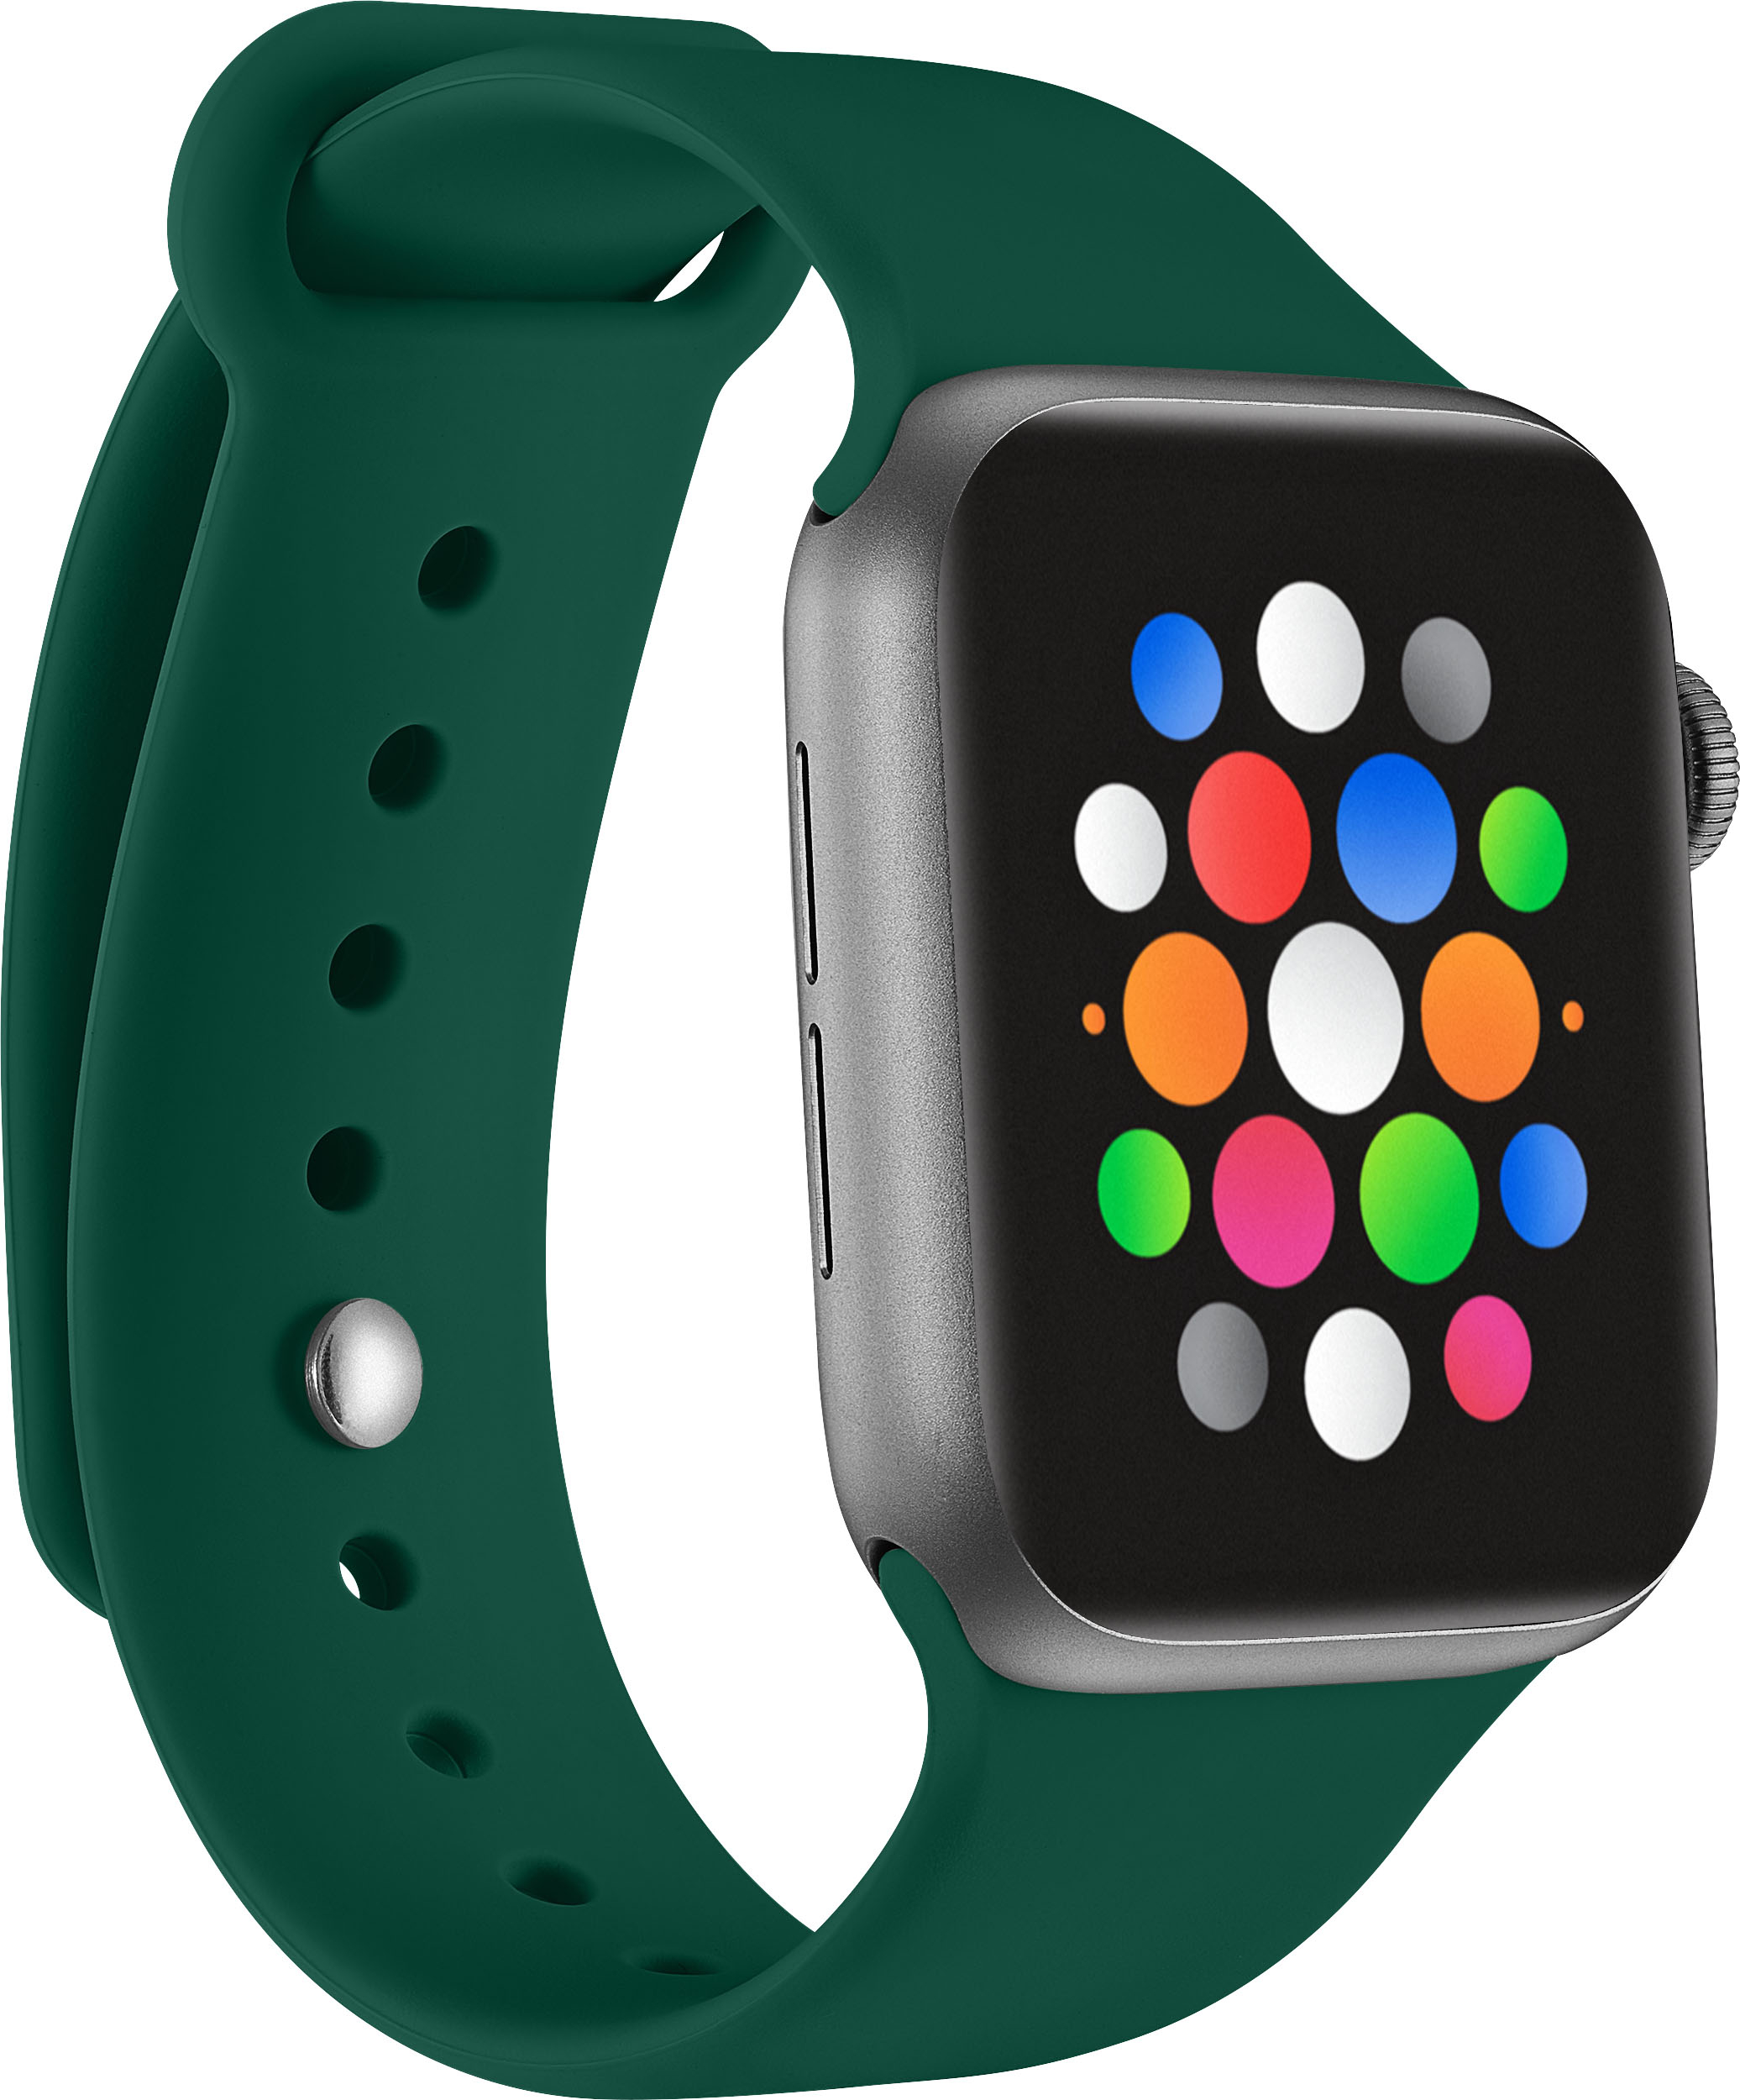 Best Apple Watch bands to buy from reputable tech retailers